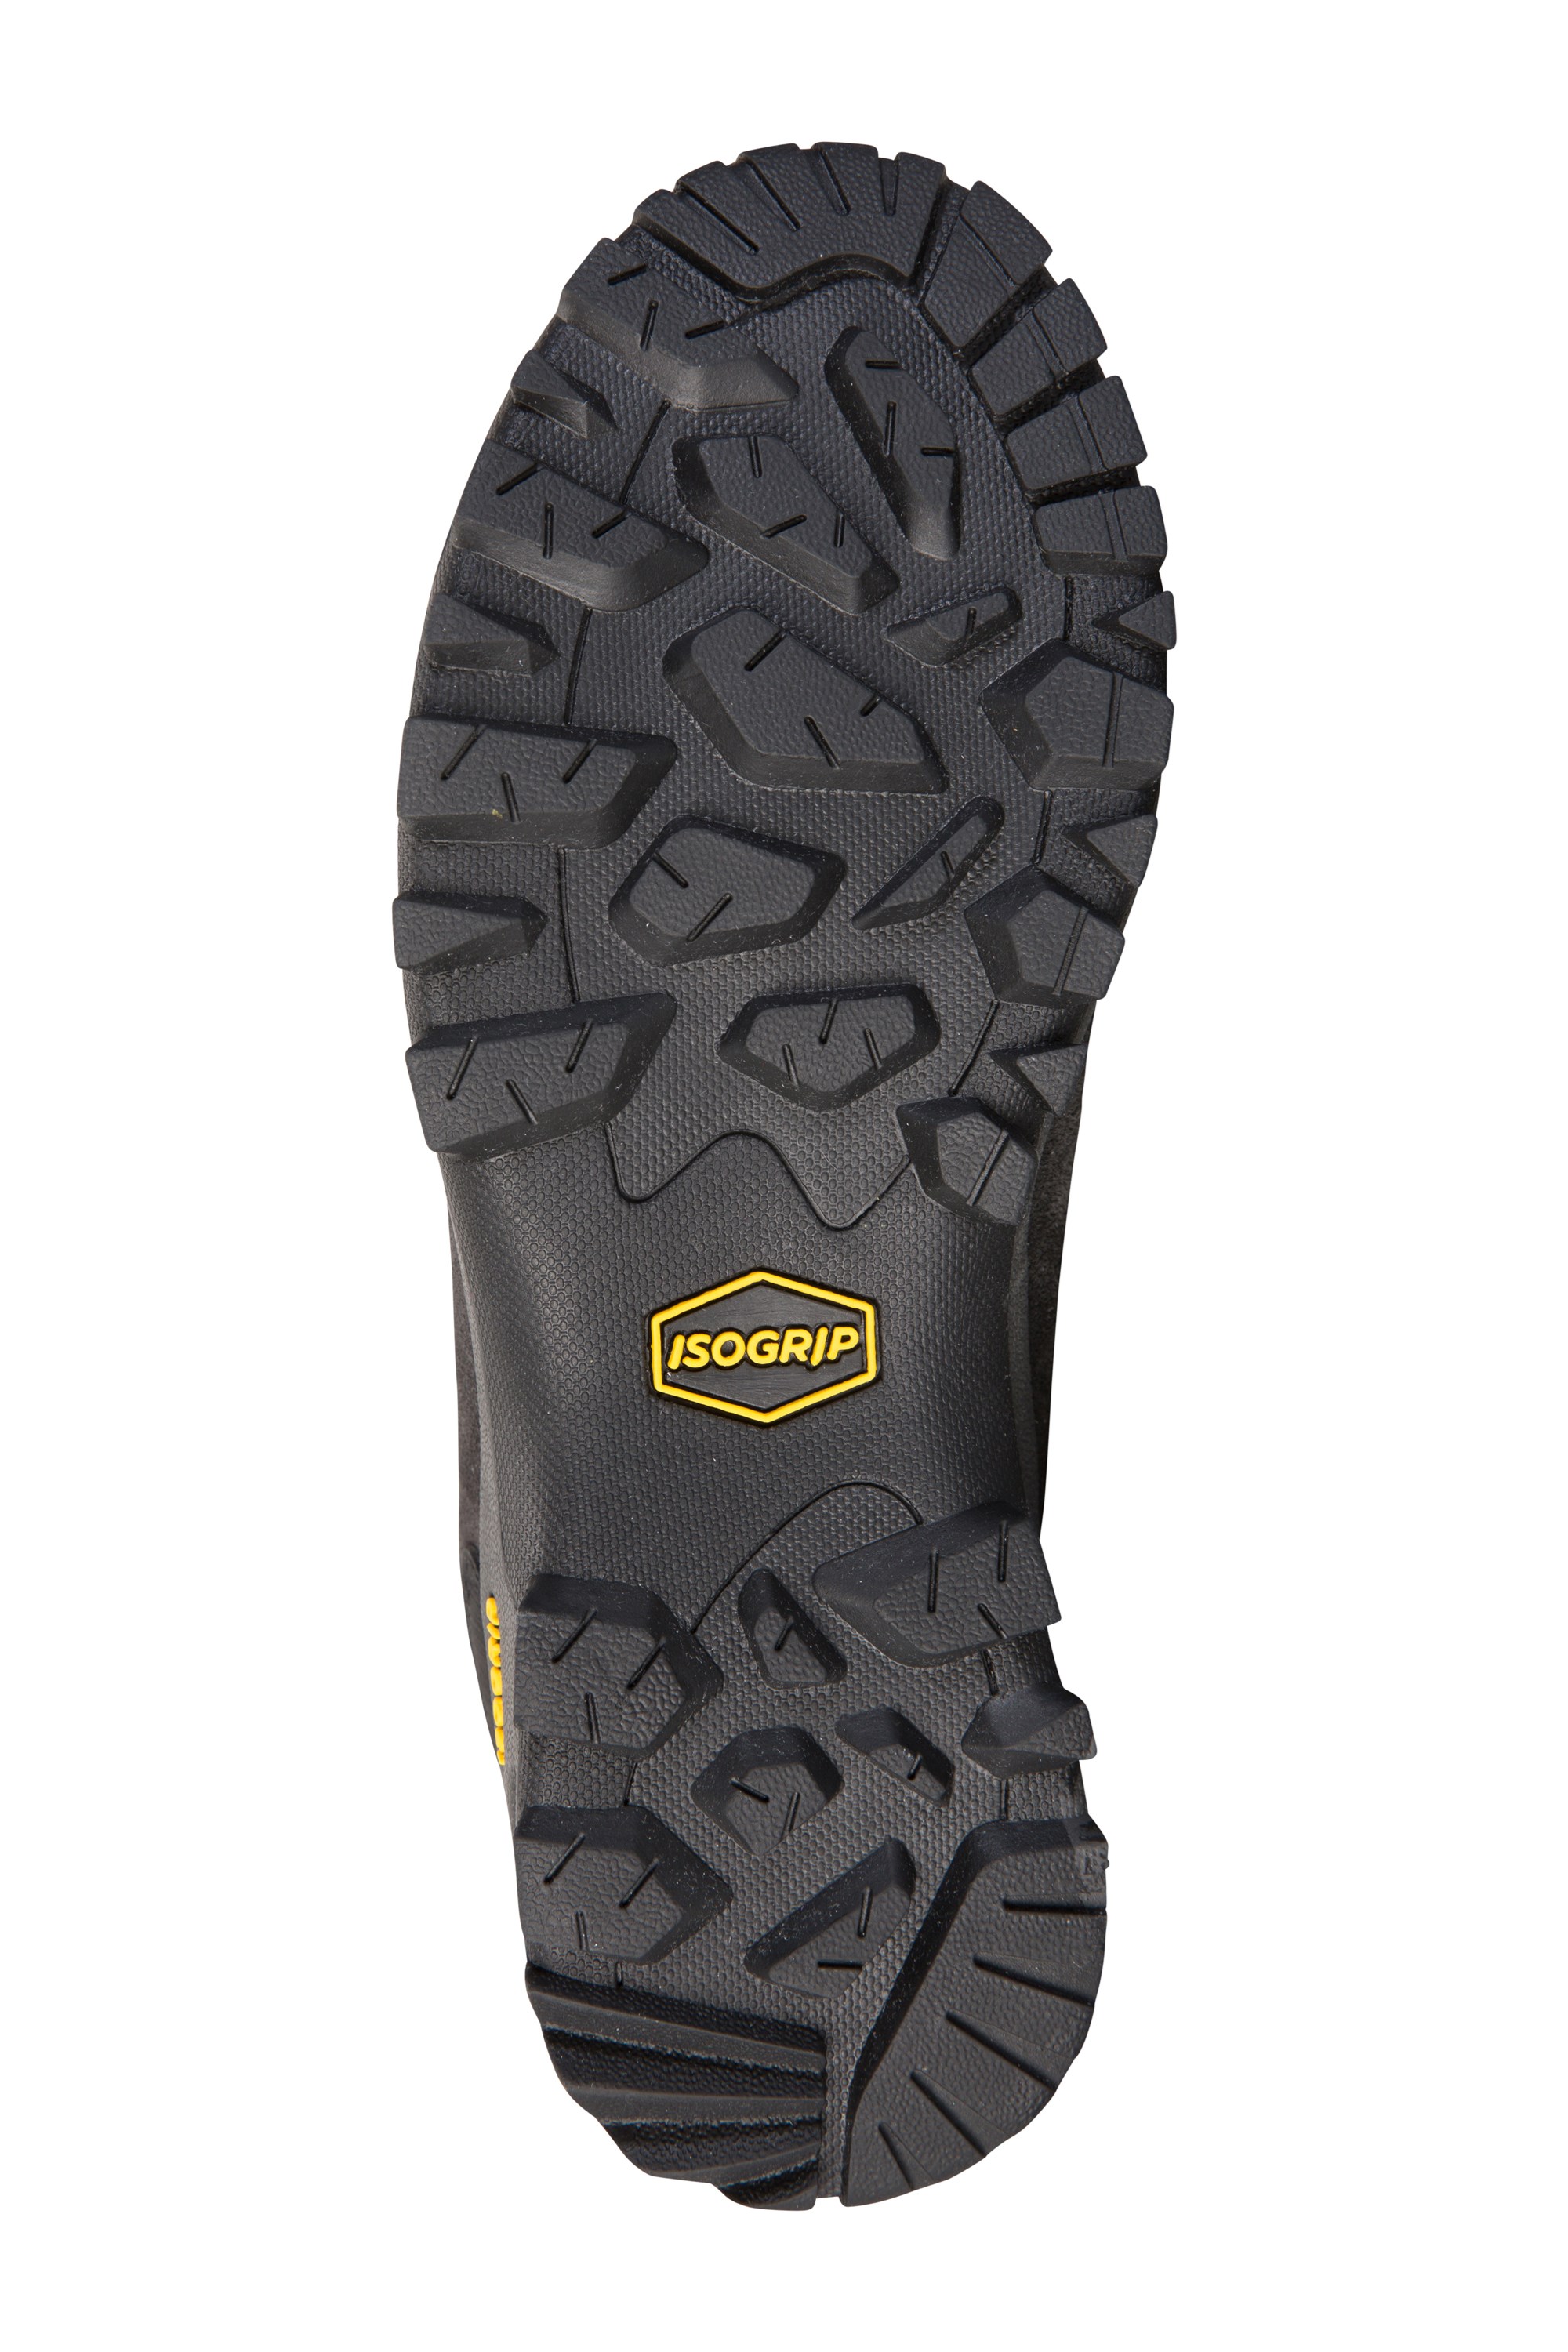 Storm Womens Waterproof IsoGrip Boots 